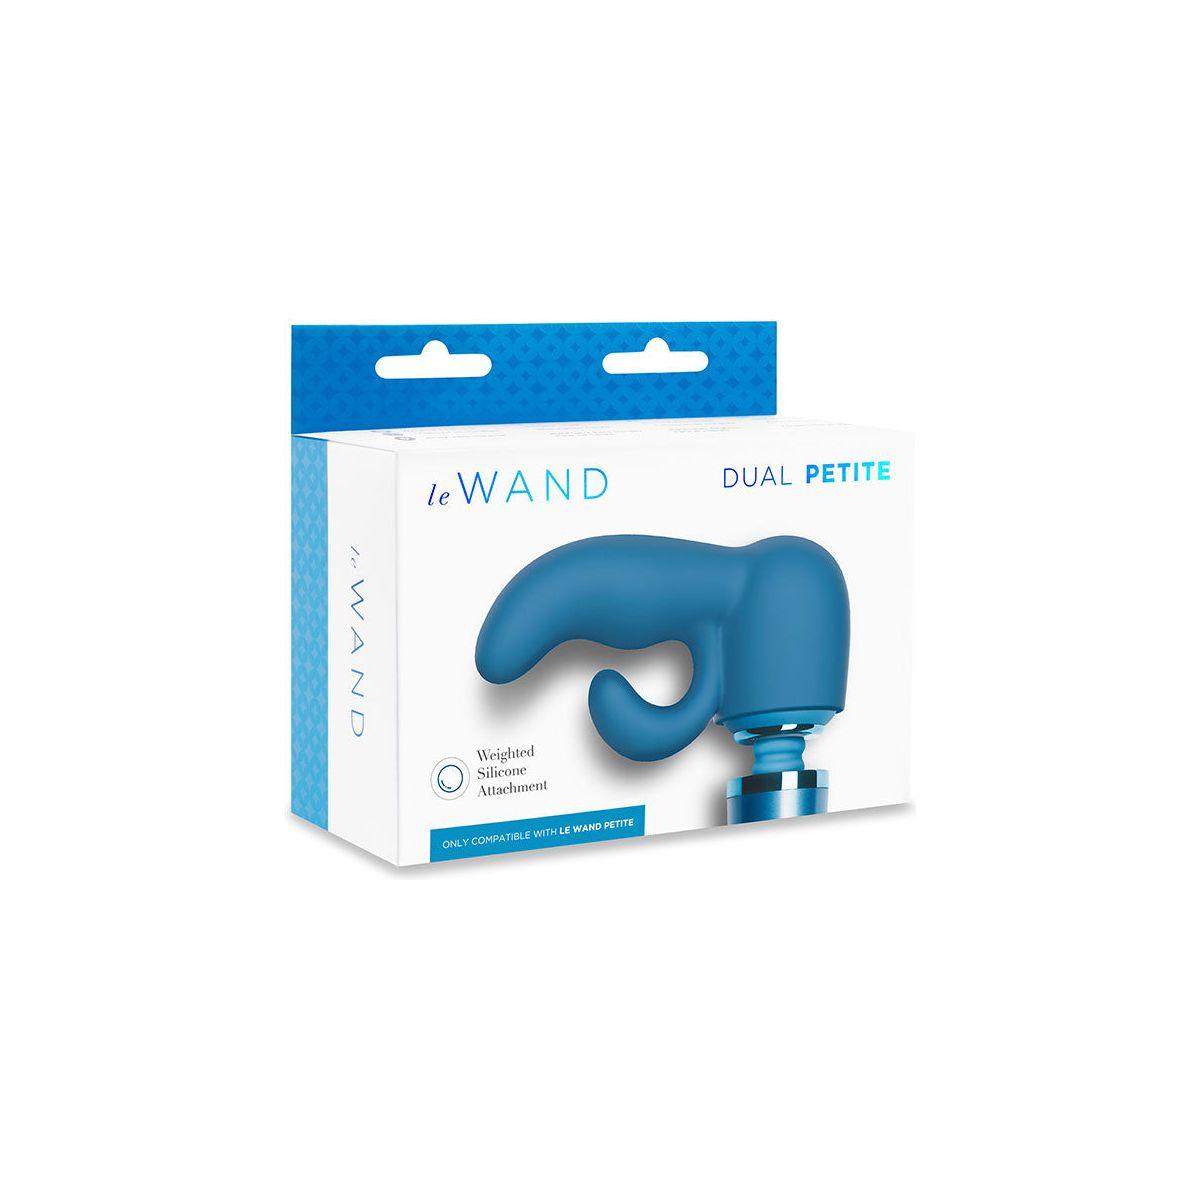 Le Wand Petite Dual Weighted Silicone Attachment - shop enby